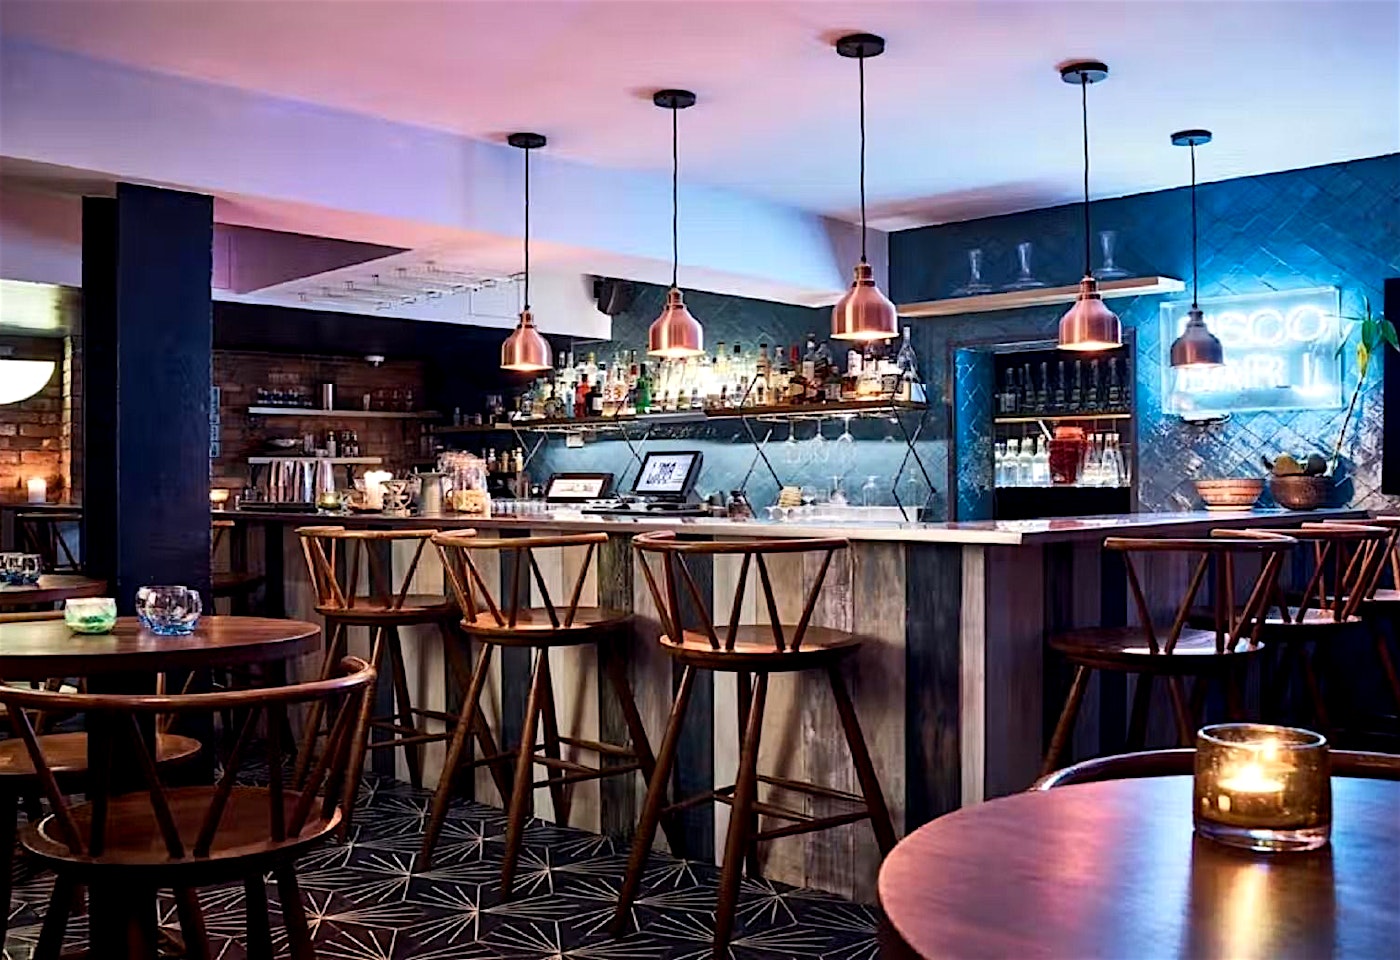 Enjoy cocktails inspired by South America in this Covent Garden basement bar